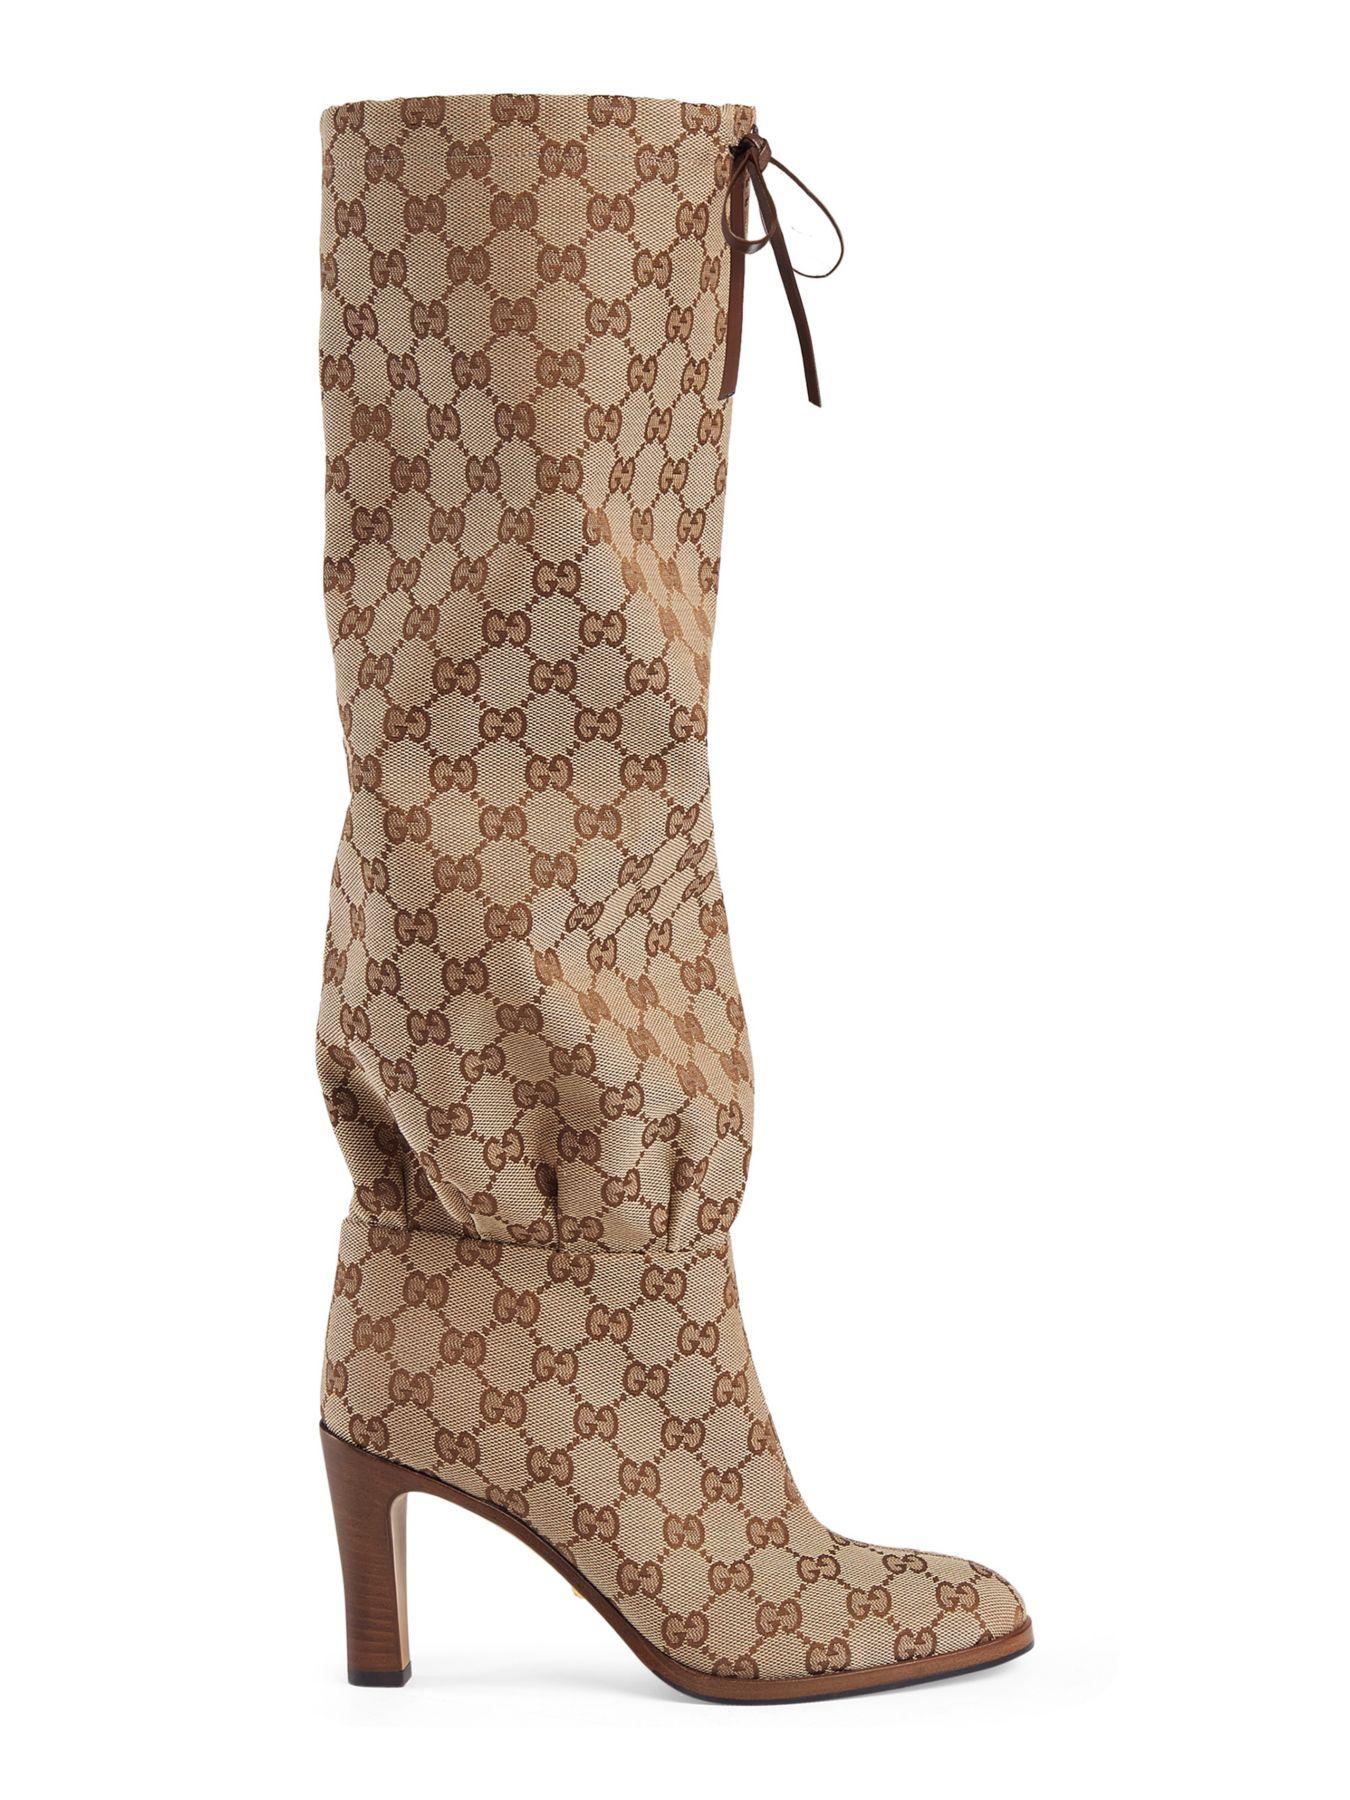 Gucci Lisa Tie Tall Boots With Logo in Natural | Lyst